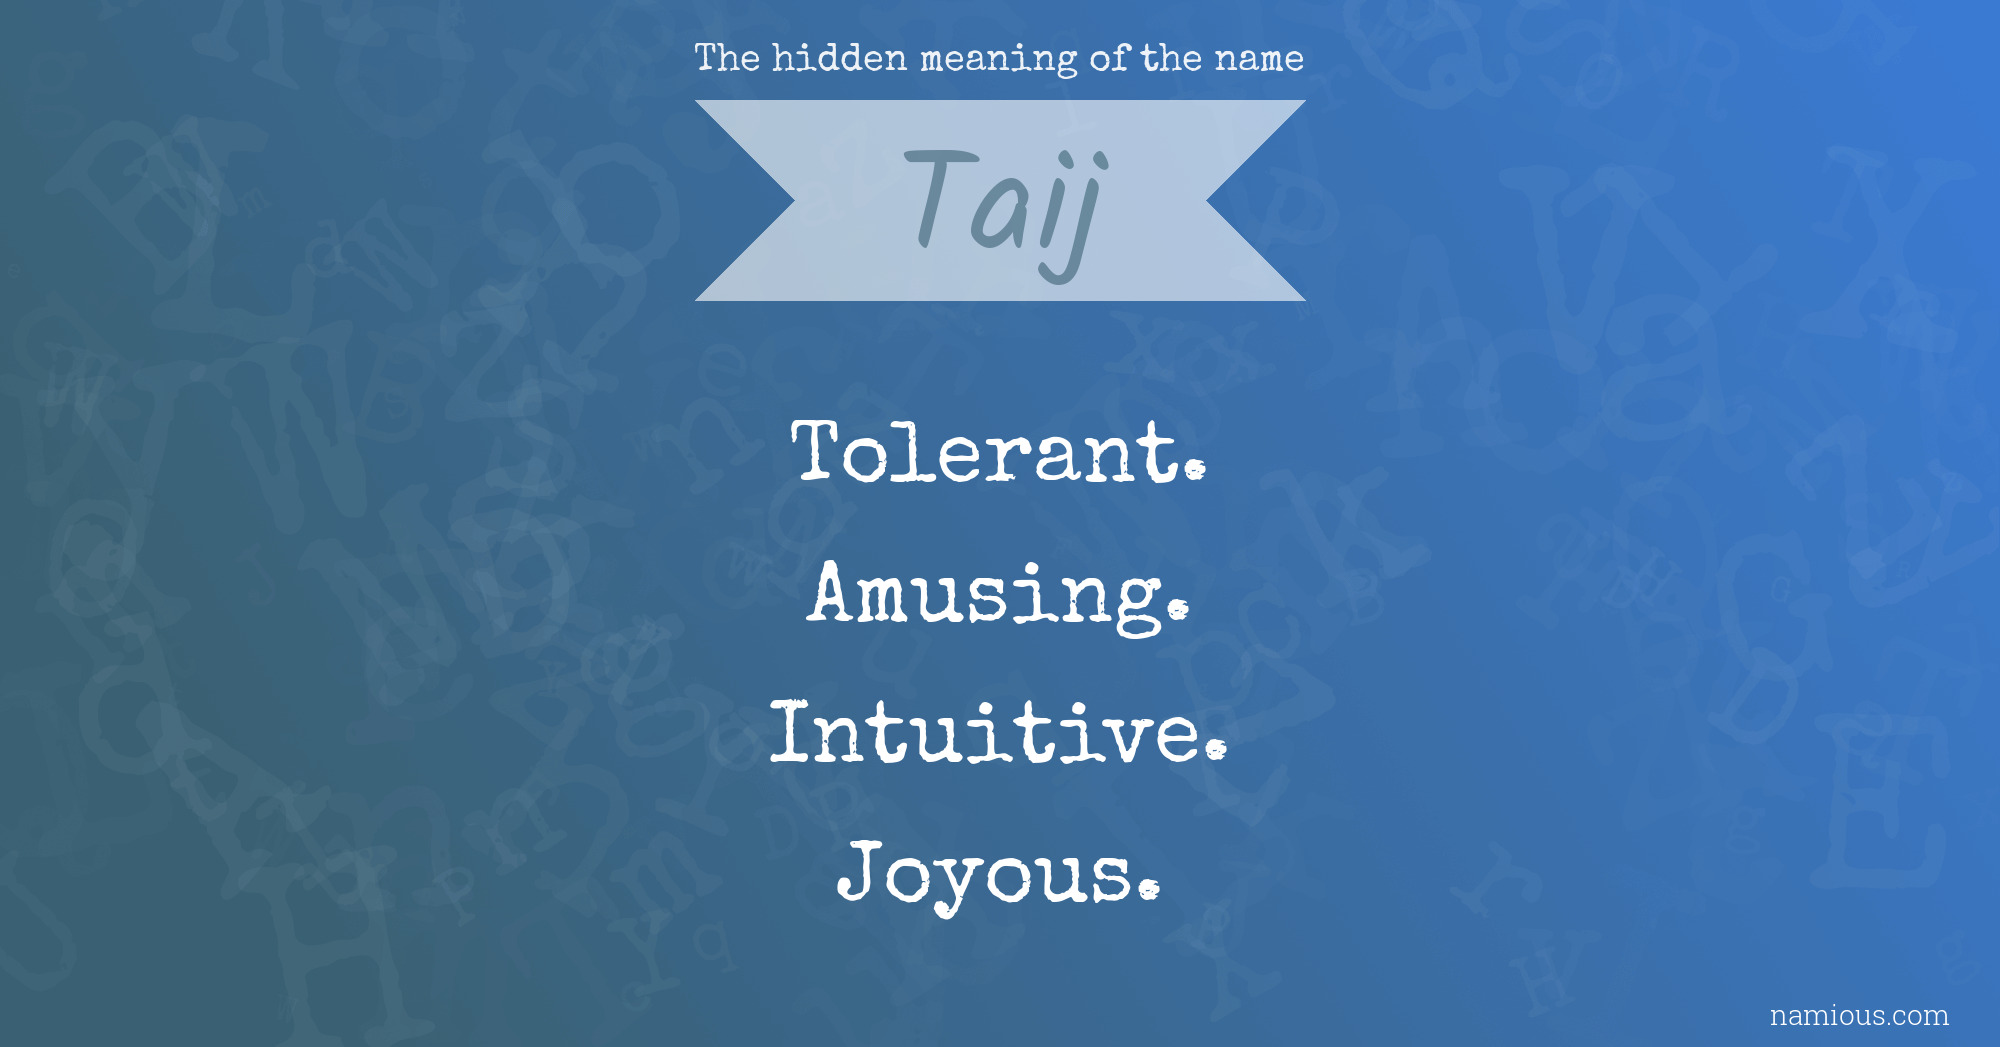 The hidden meaning of the name Taij